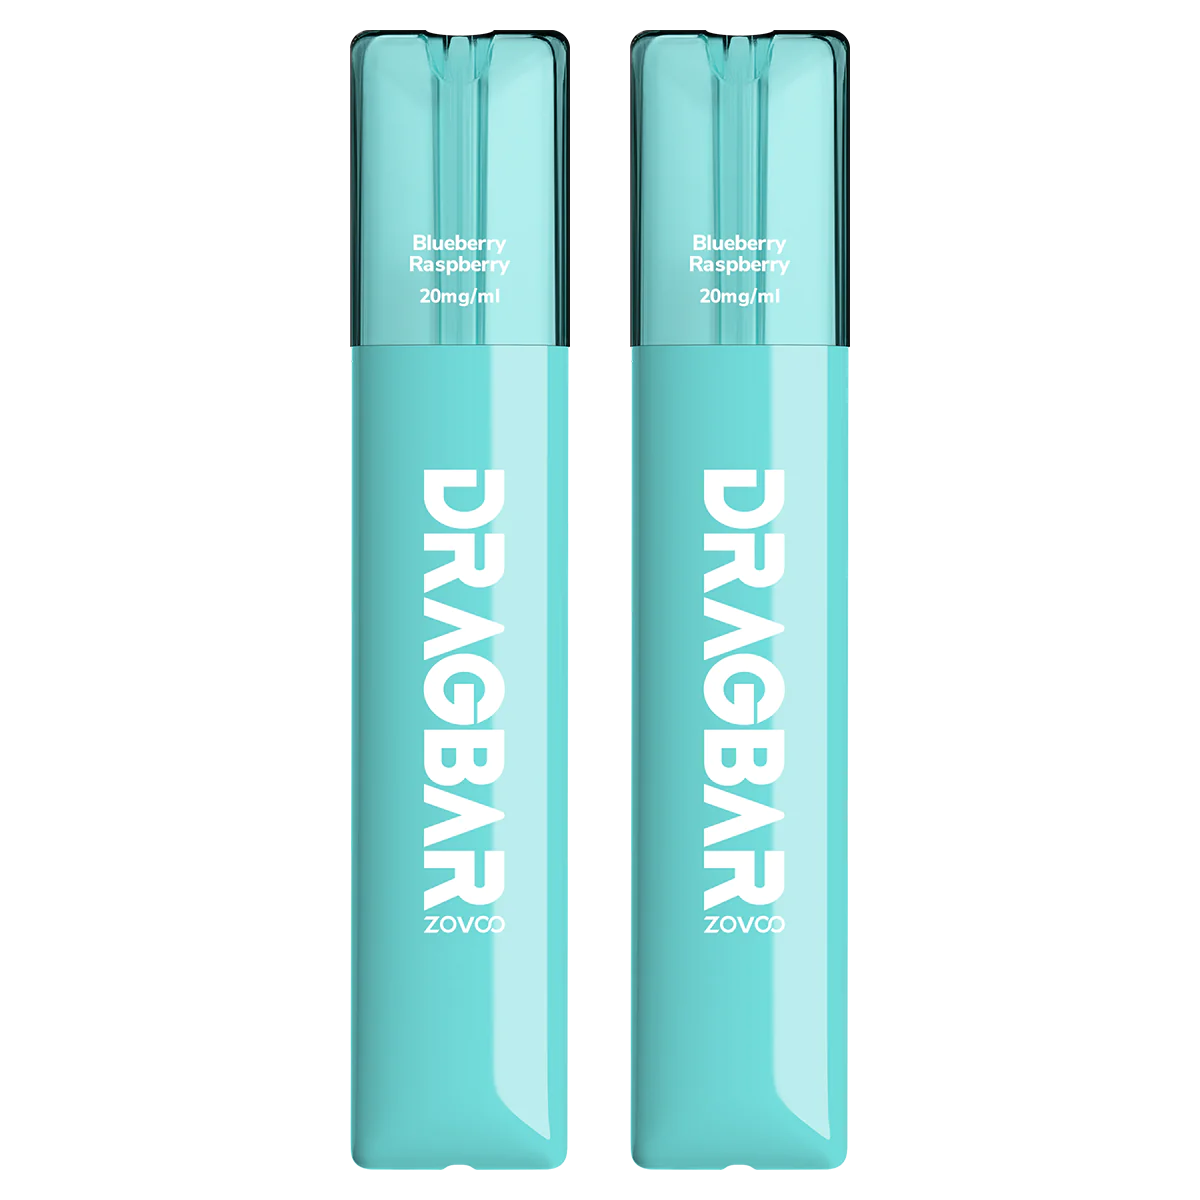  Blueberry Raspberry By Zovoo Dragbar Z700 SE Disposable Vape 20mg (Twin Pack) 